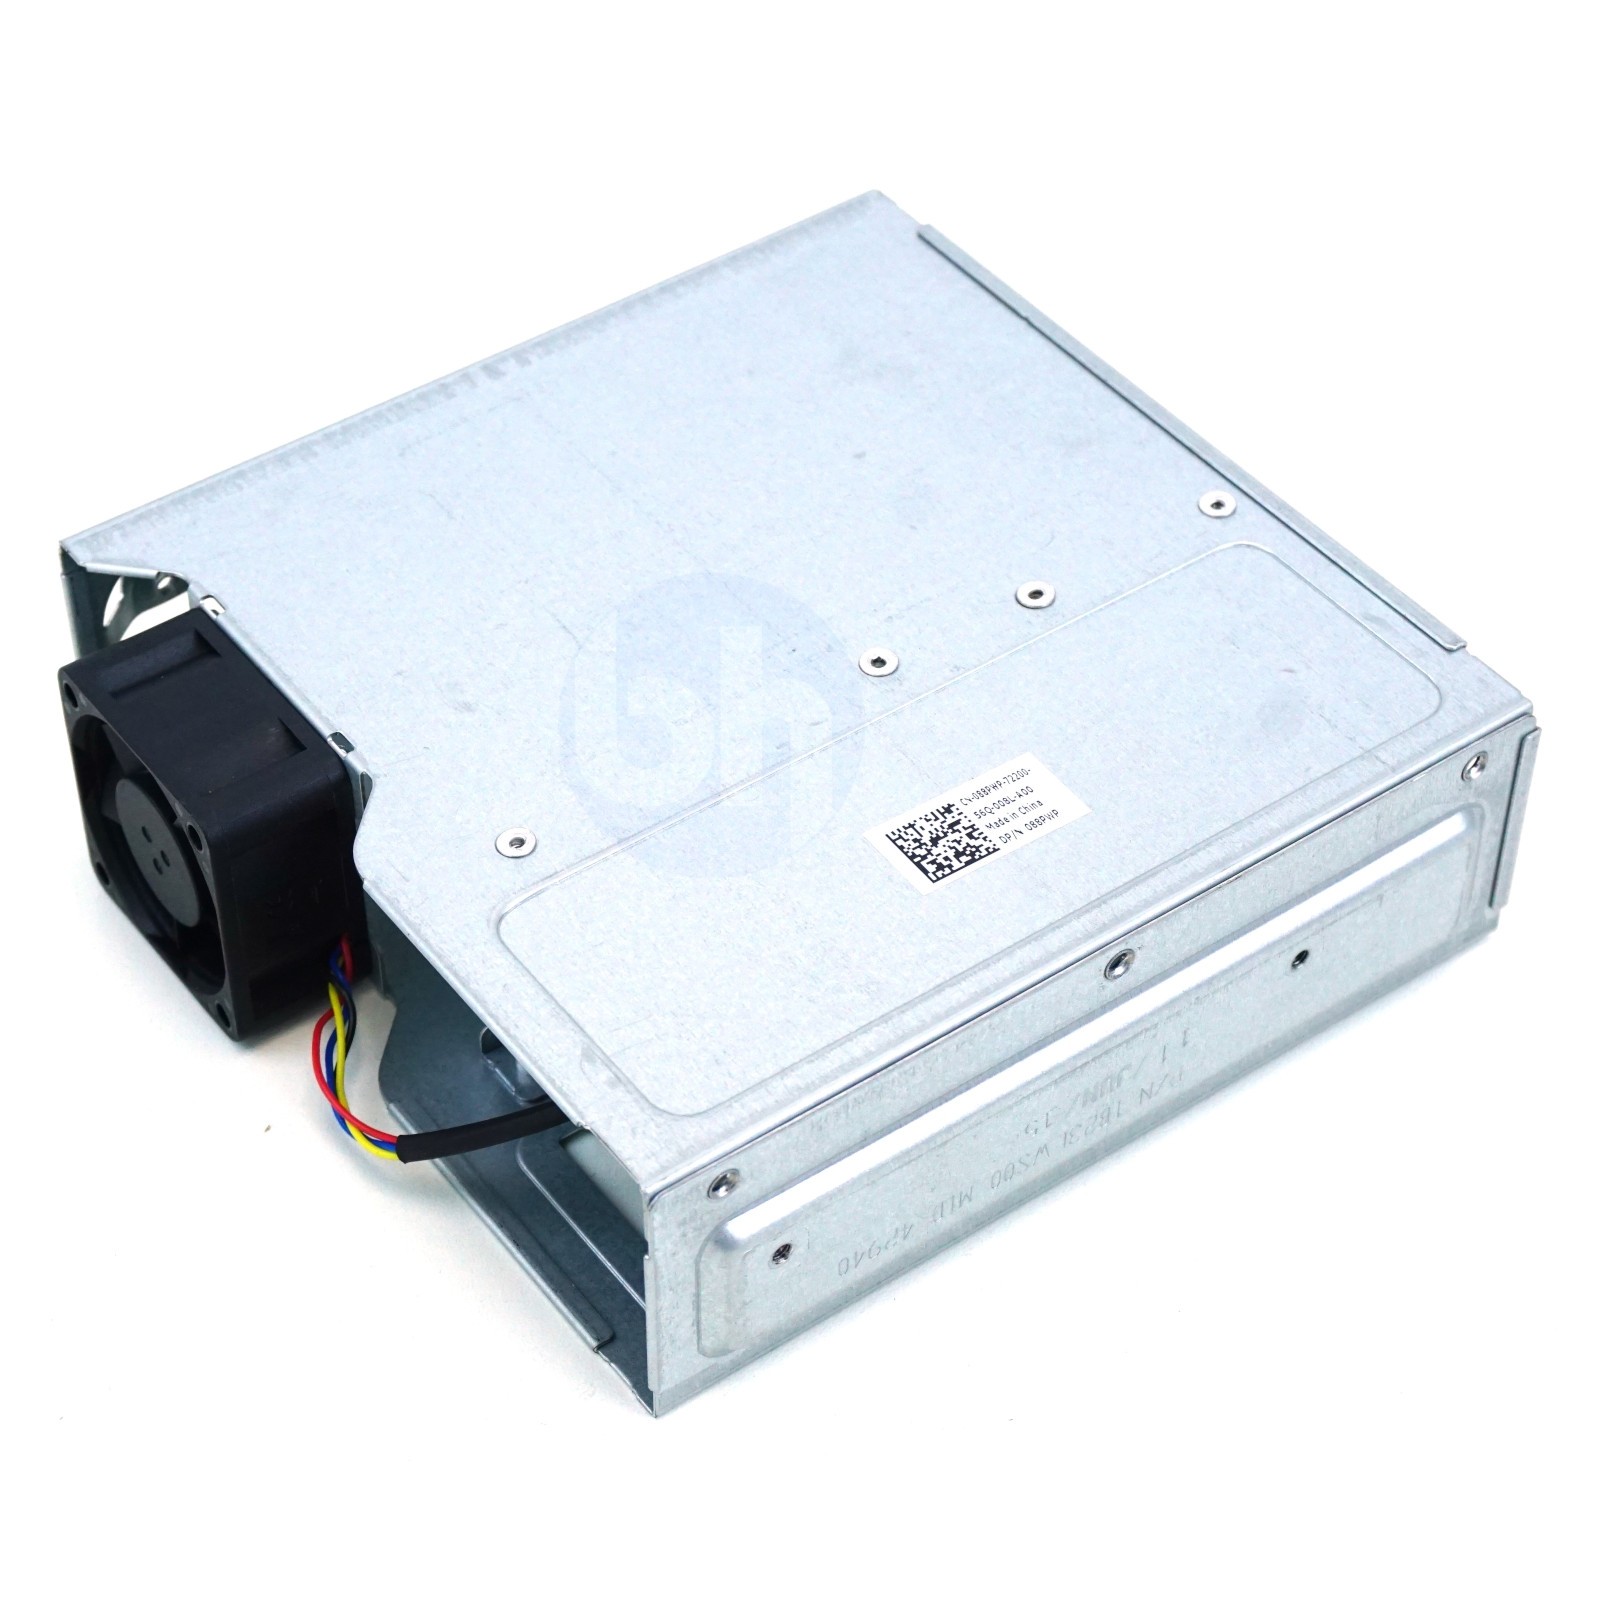 Dell Precision T5600, T5610 5.25" 2x SFF HDD Cage and Fan Assembly